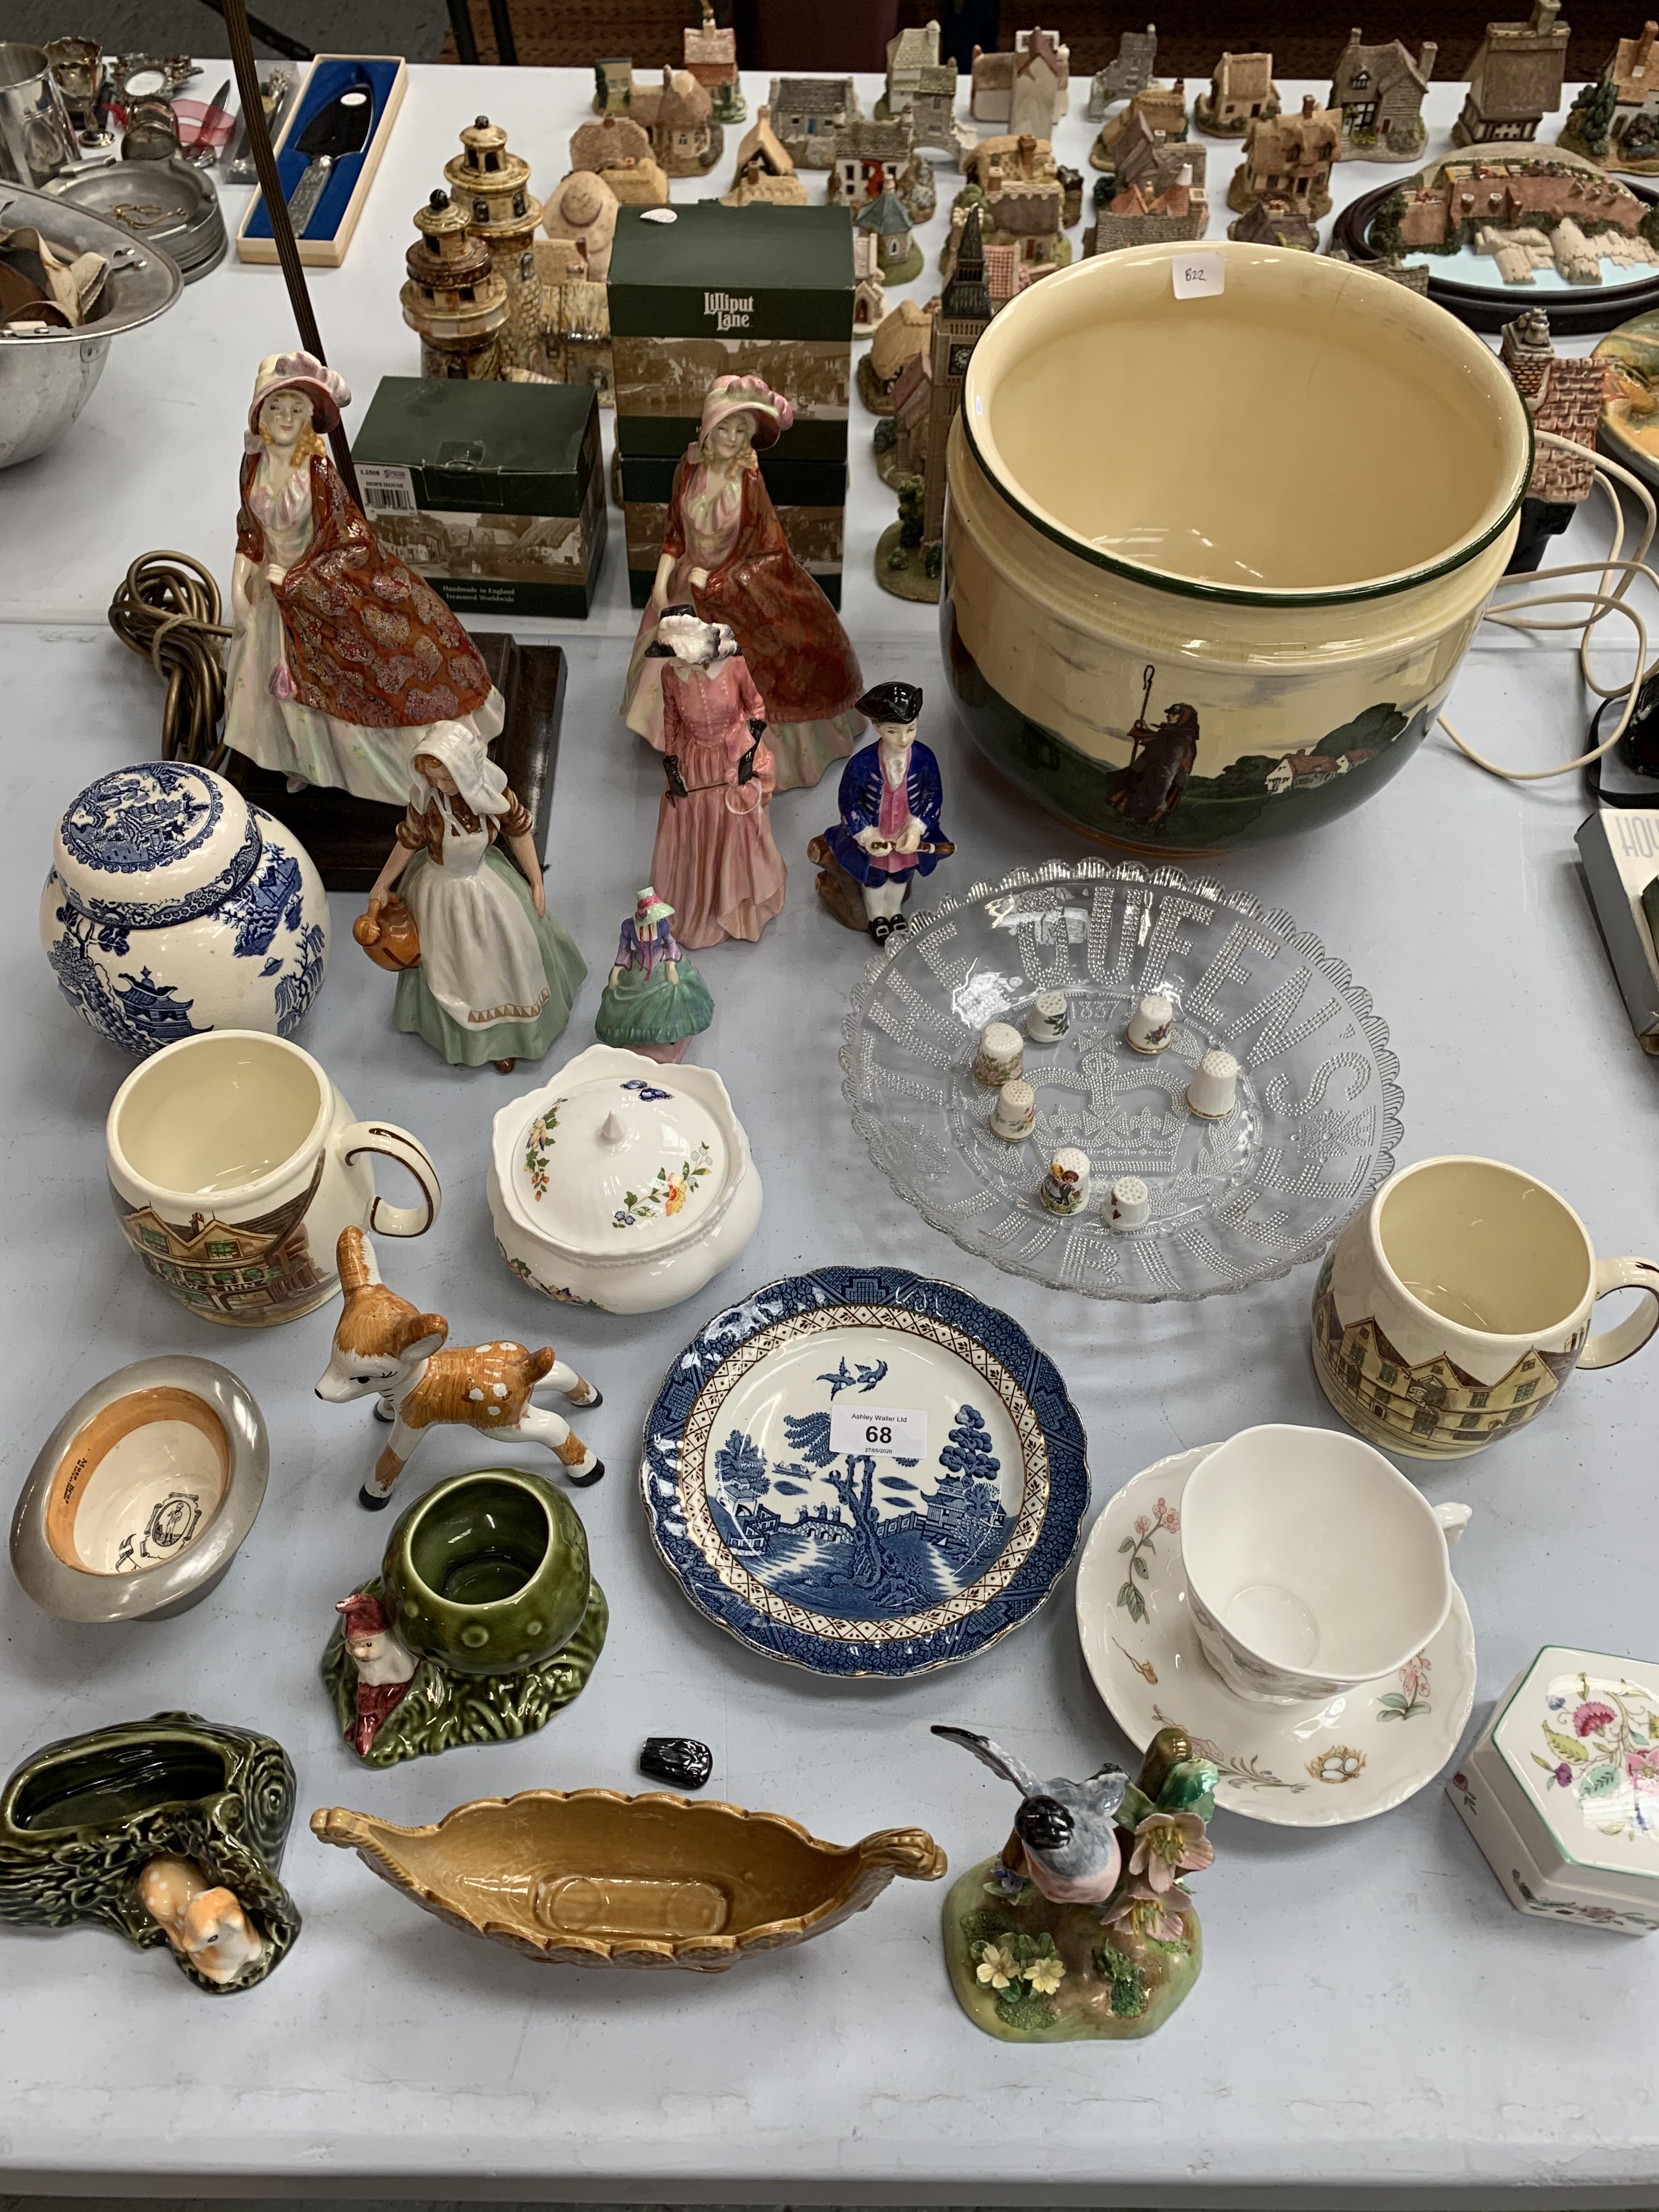 A LARGE COLLECTION OF VARIOUS CERAMIC ITEMS TO INCLUDE FIGURINES, GINGER JAR, PLANTER, DISHES, ETC - Image 2 of 8